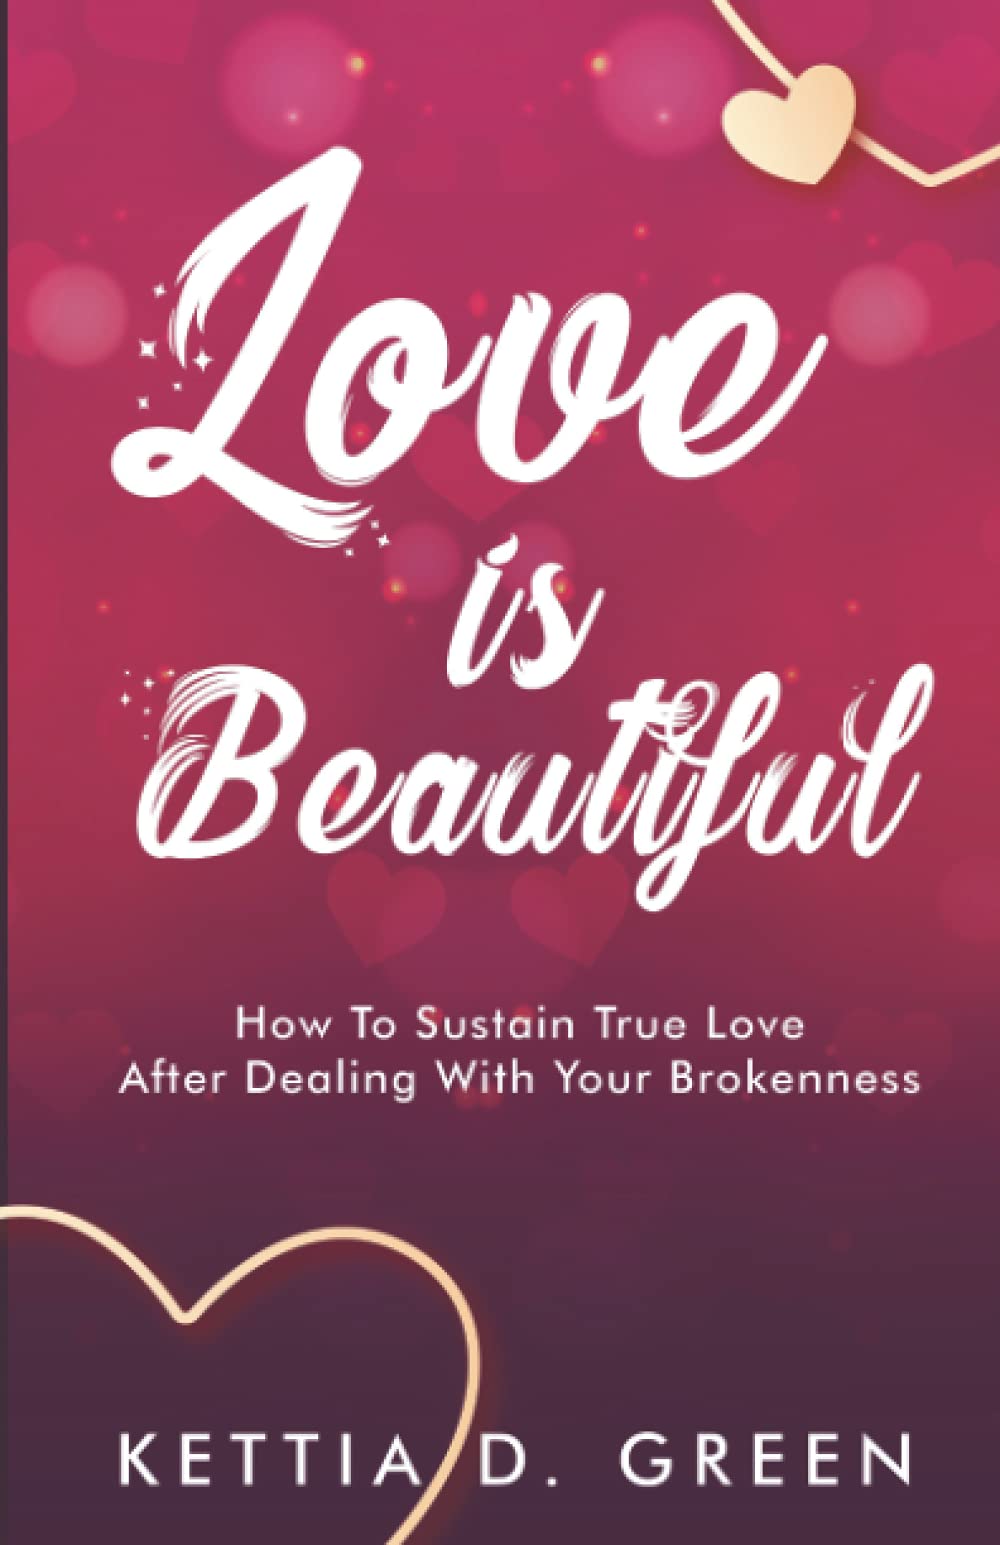 Love Is Beautiful: How To Sustain True Love After Dealing With Your Brokenness